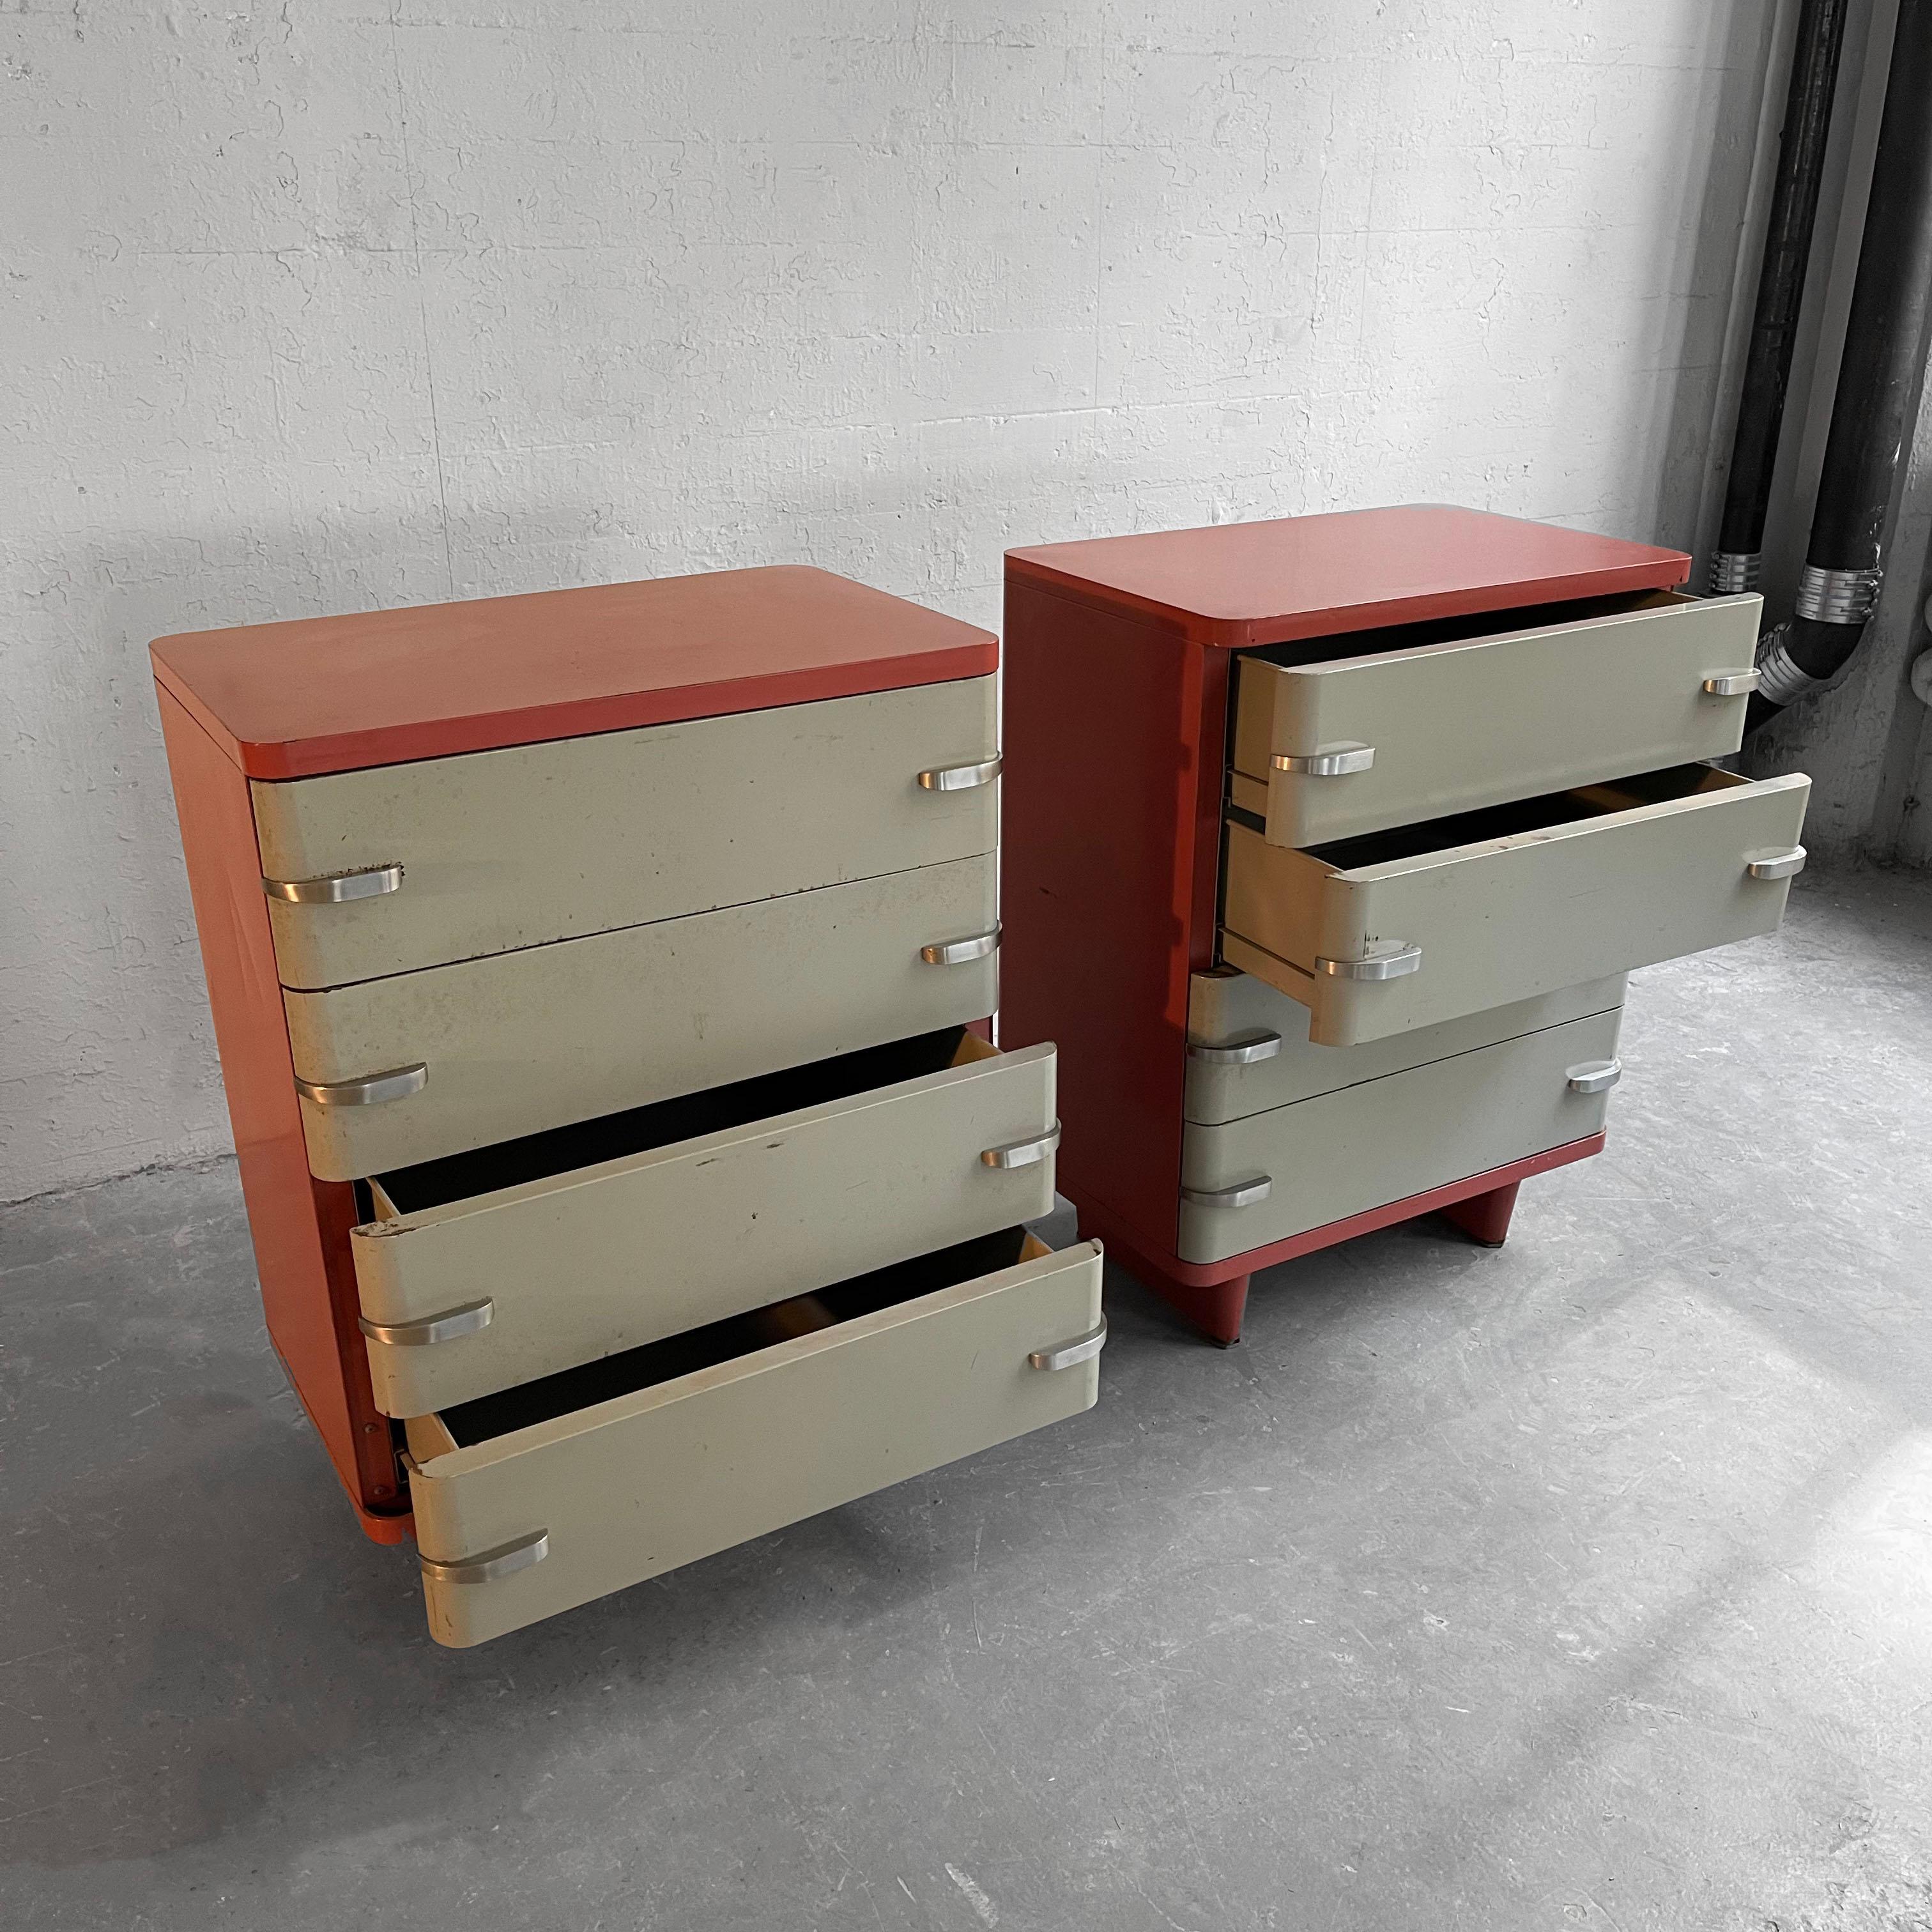 Machine-Age Painted Steel Highboy Dressers by Norman Bel Geddes For Sale 5